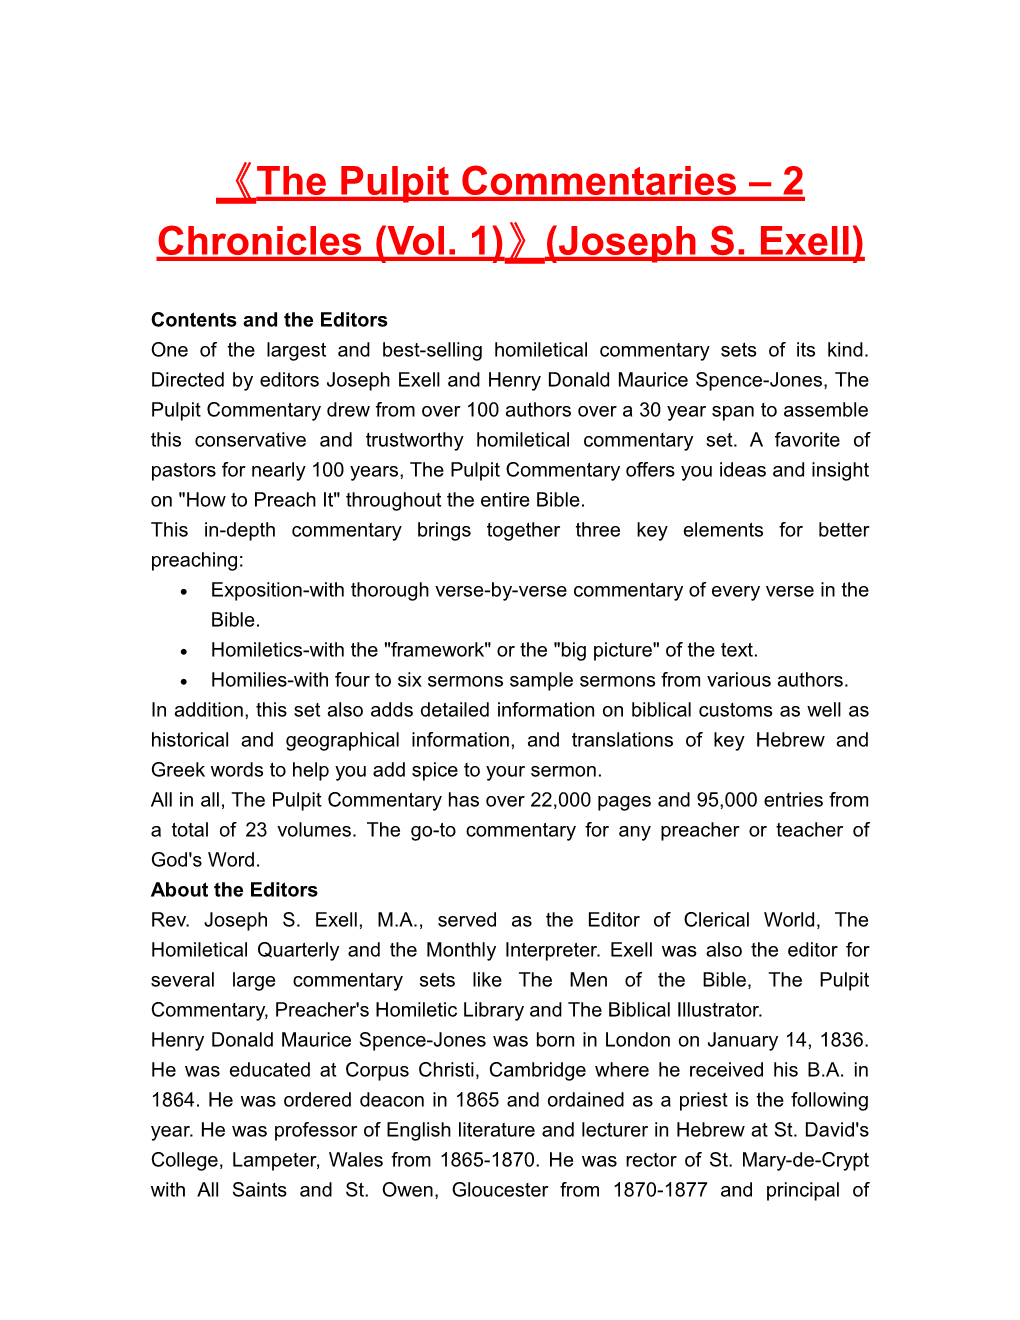 The Pulpit Commentaries 2 Chronicles (Vol. 1) (Joseph S. Exell)